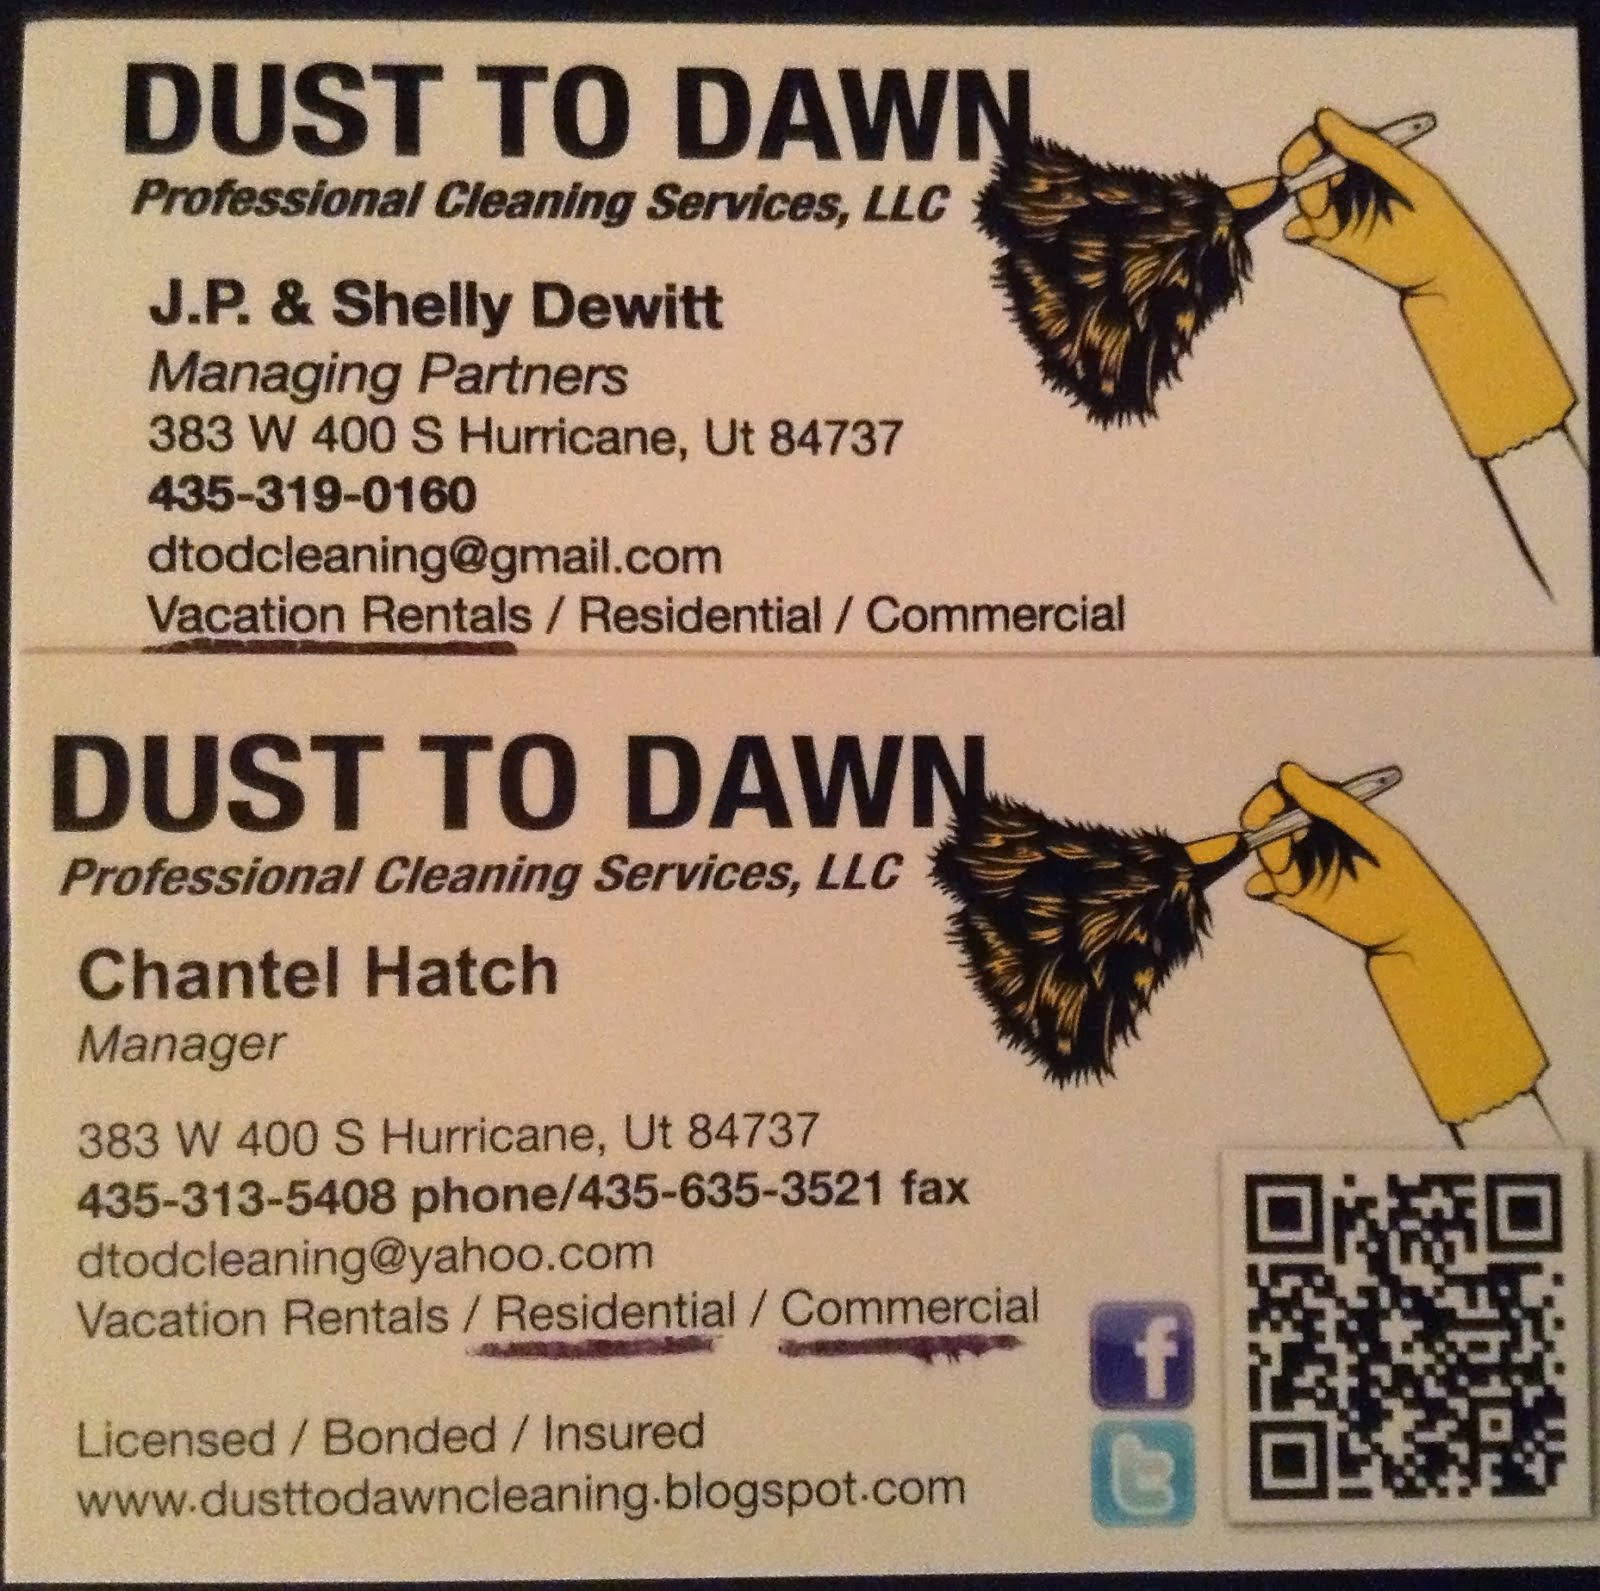 Dust to Dawn Professional Cleaning, LLC